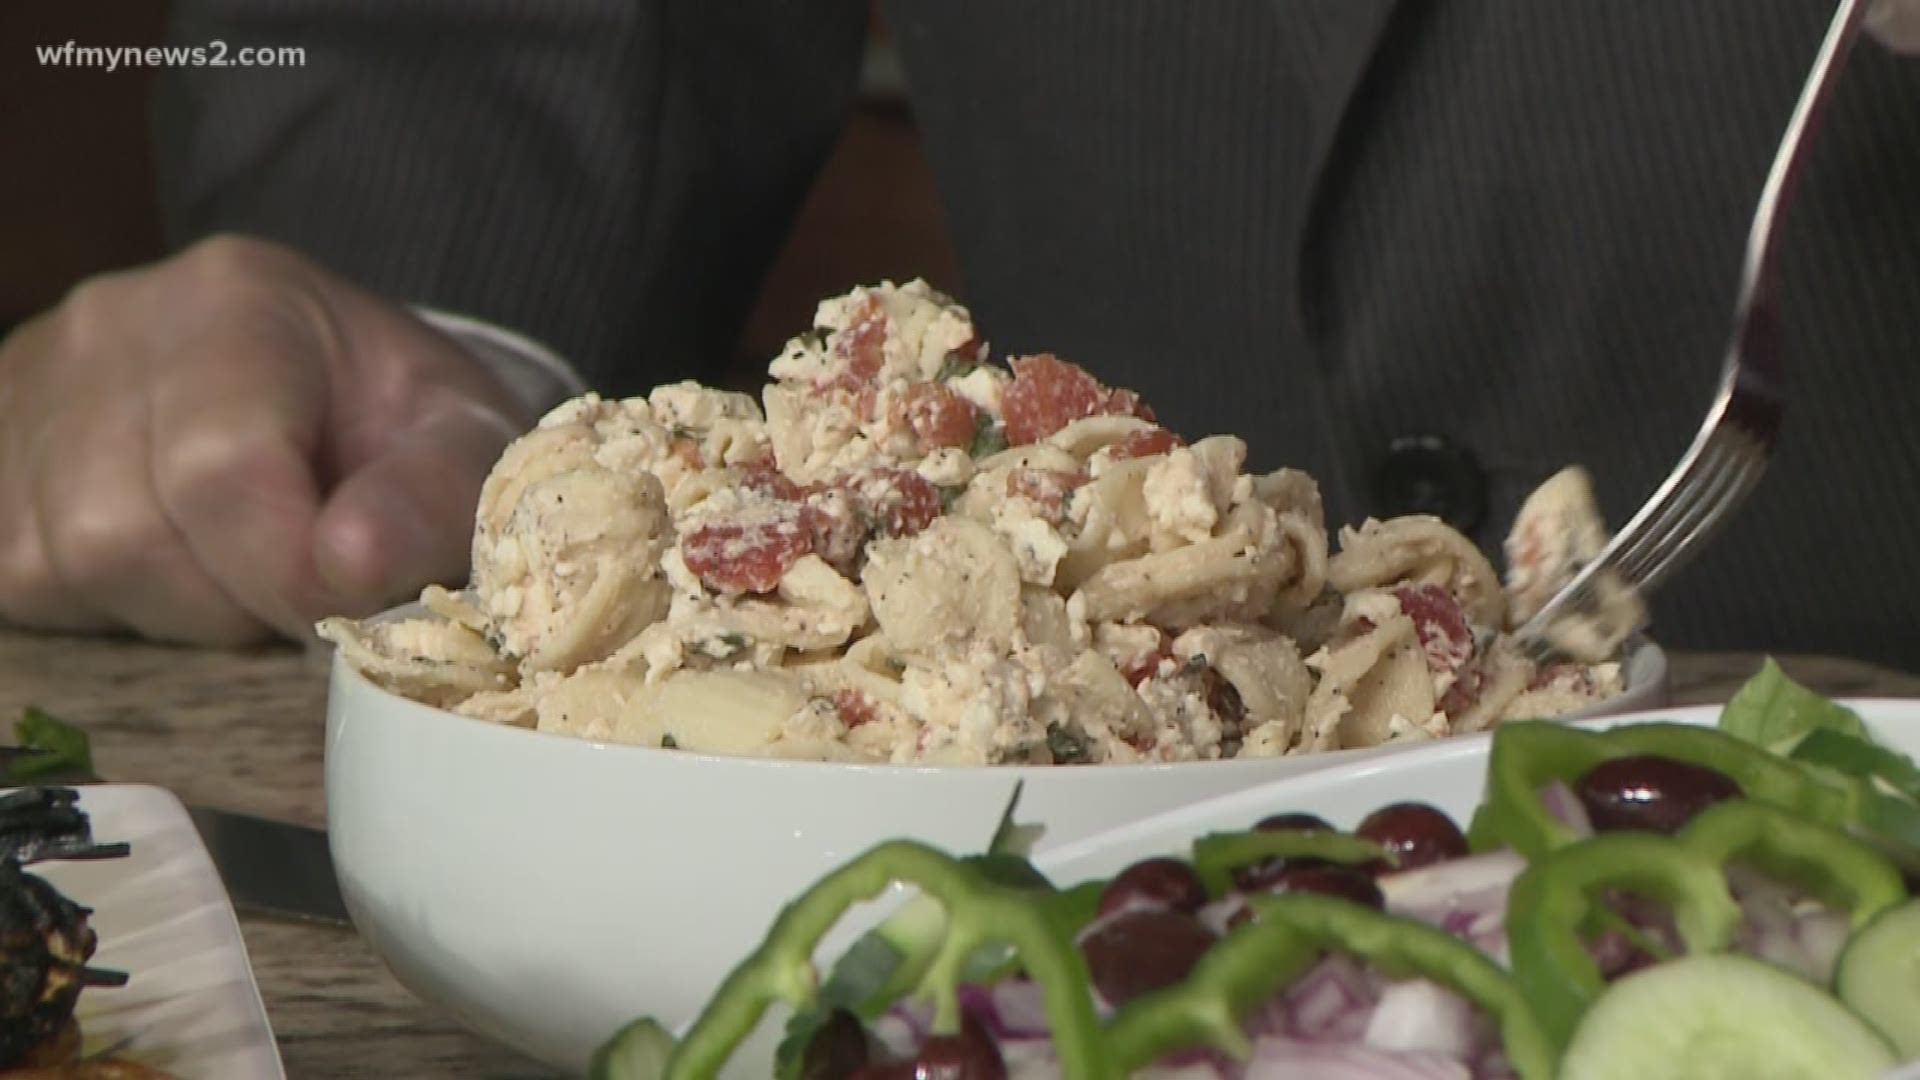 Erin Williams is back in the studio to share some summer fun recipe for a quick pasta salad that anyone can try.